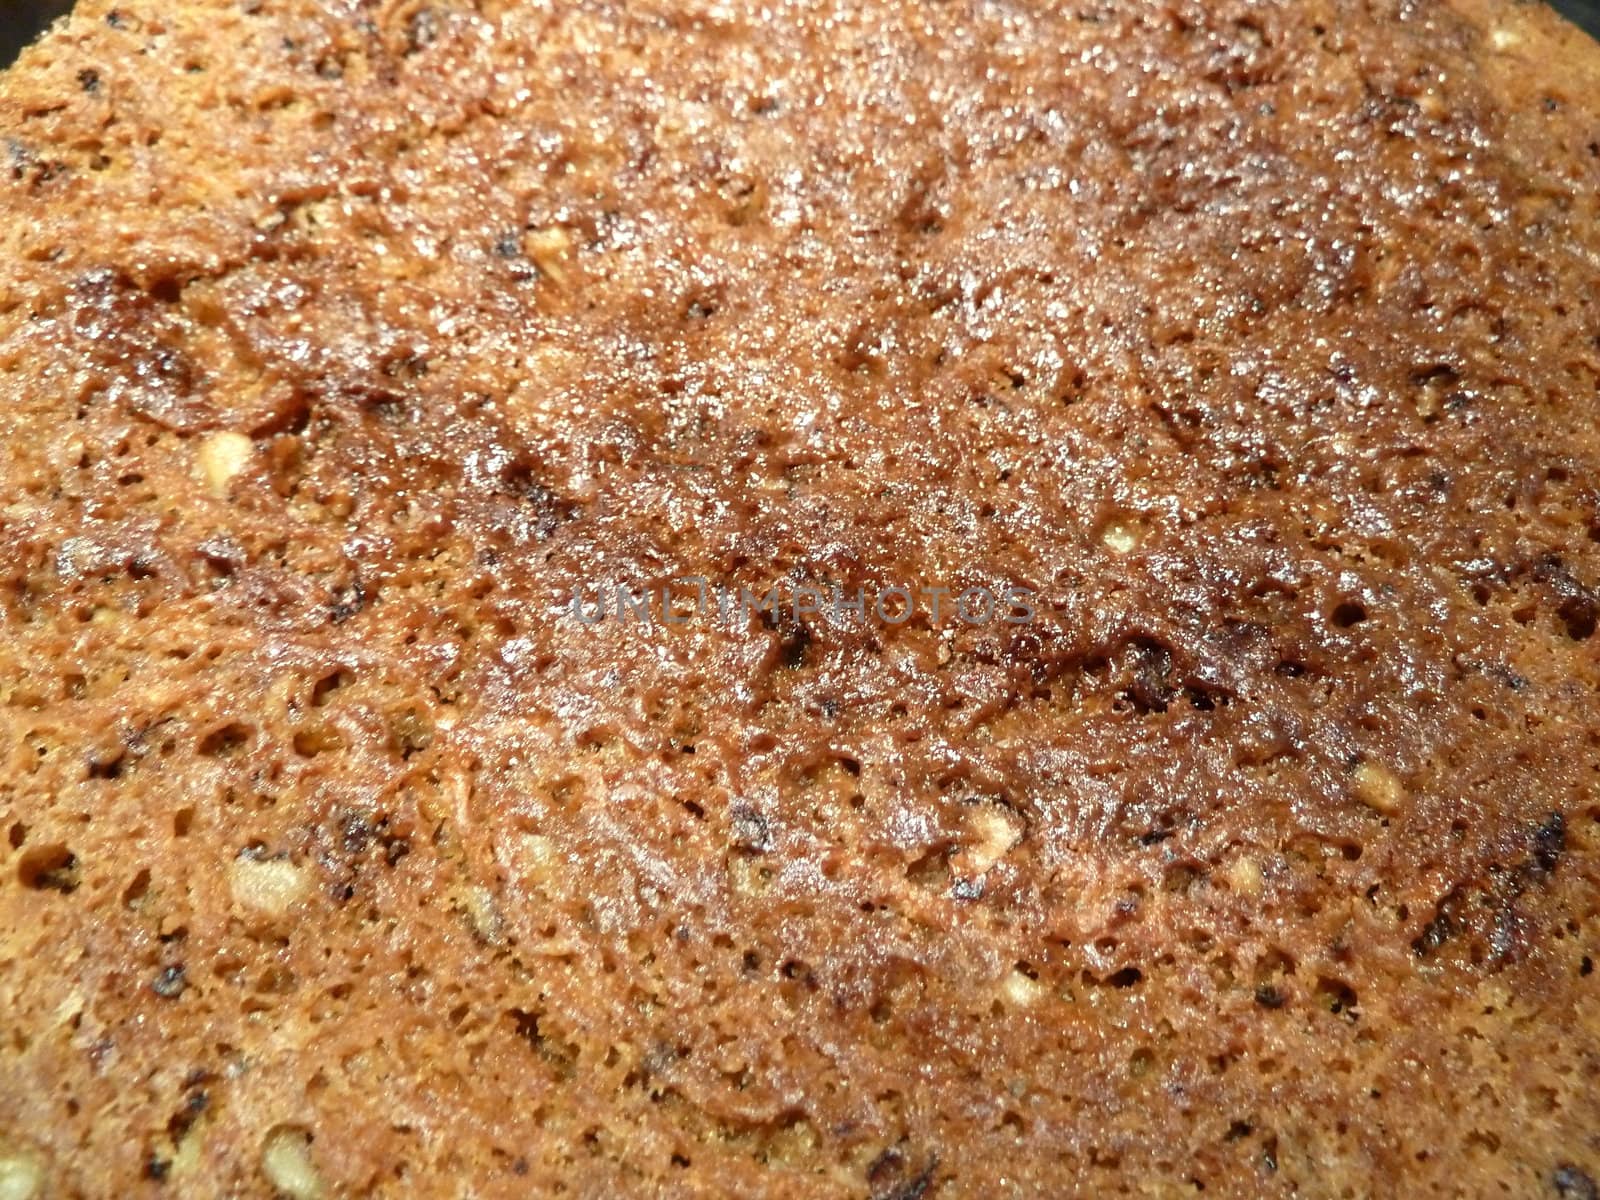 cake surface as a background